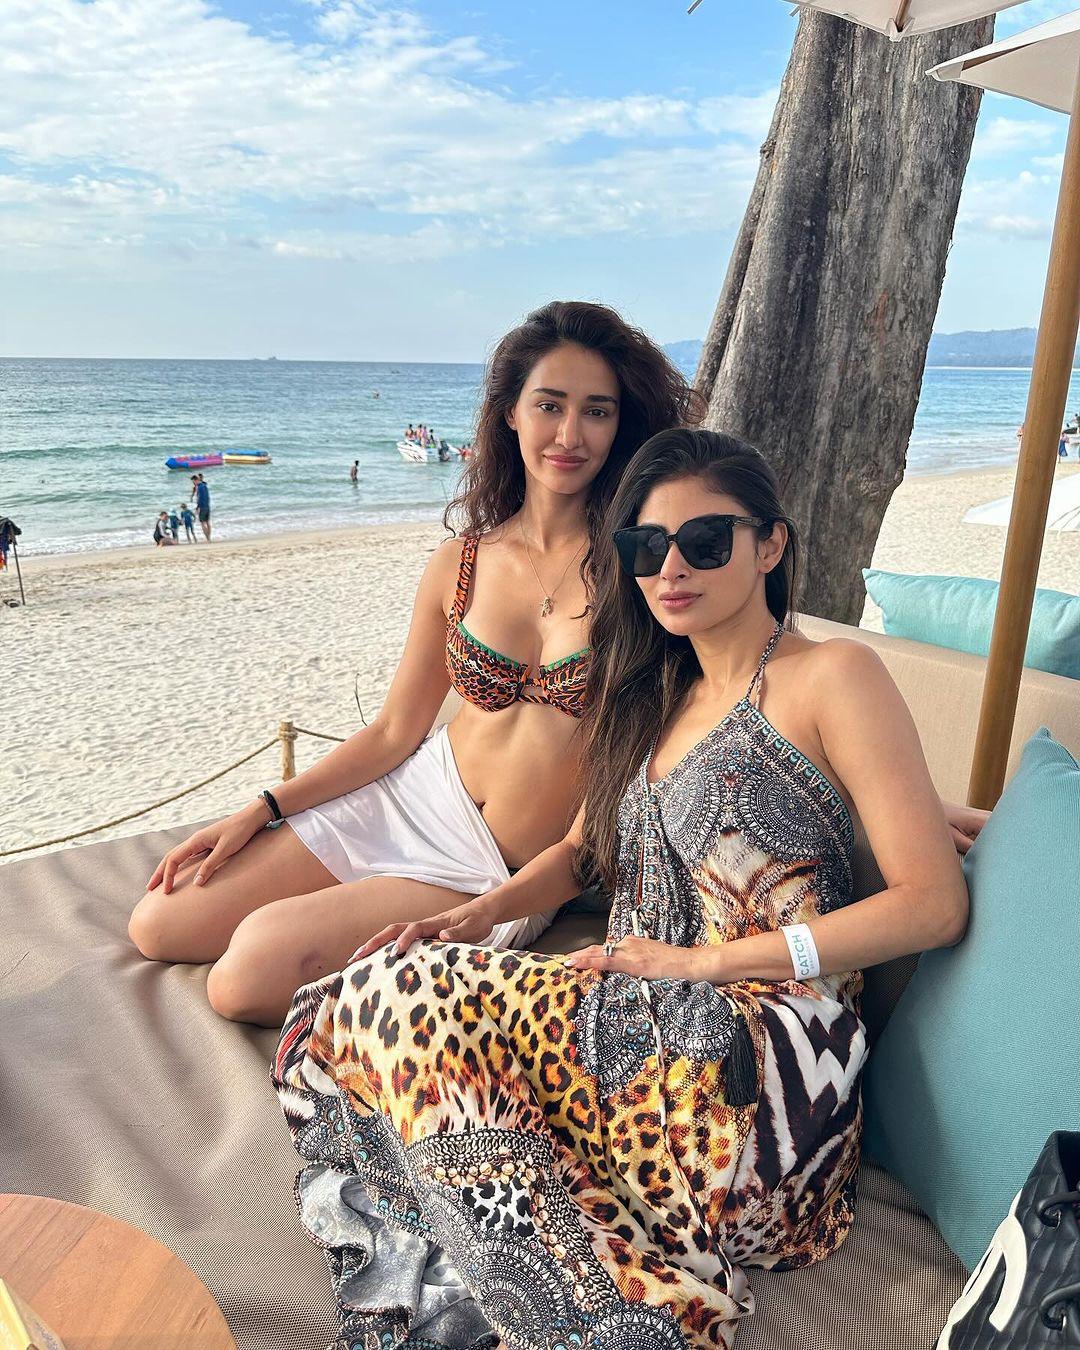 Both the actress' social media pages are full of enviable snaps of them chilling and having fun by the beach